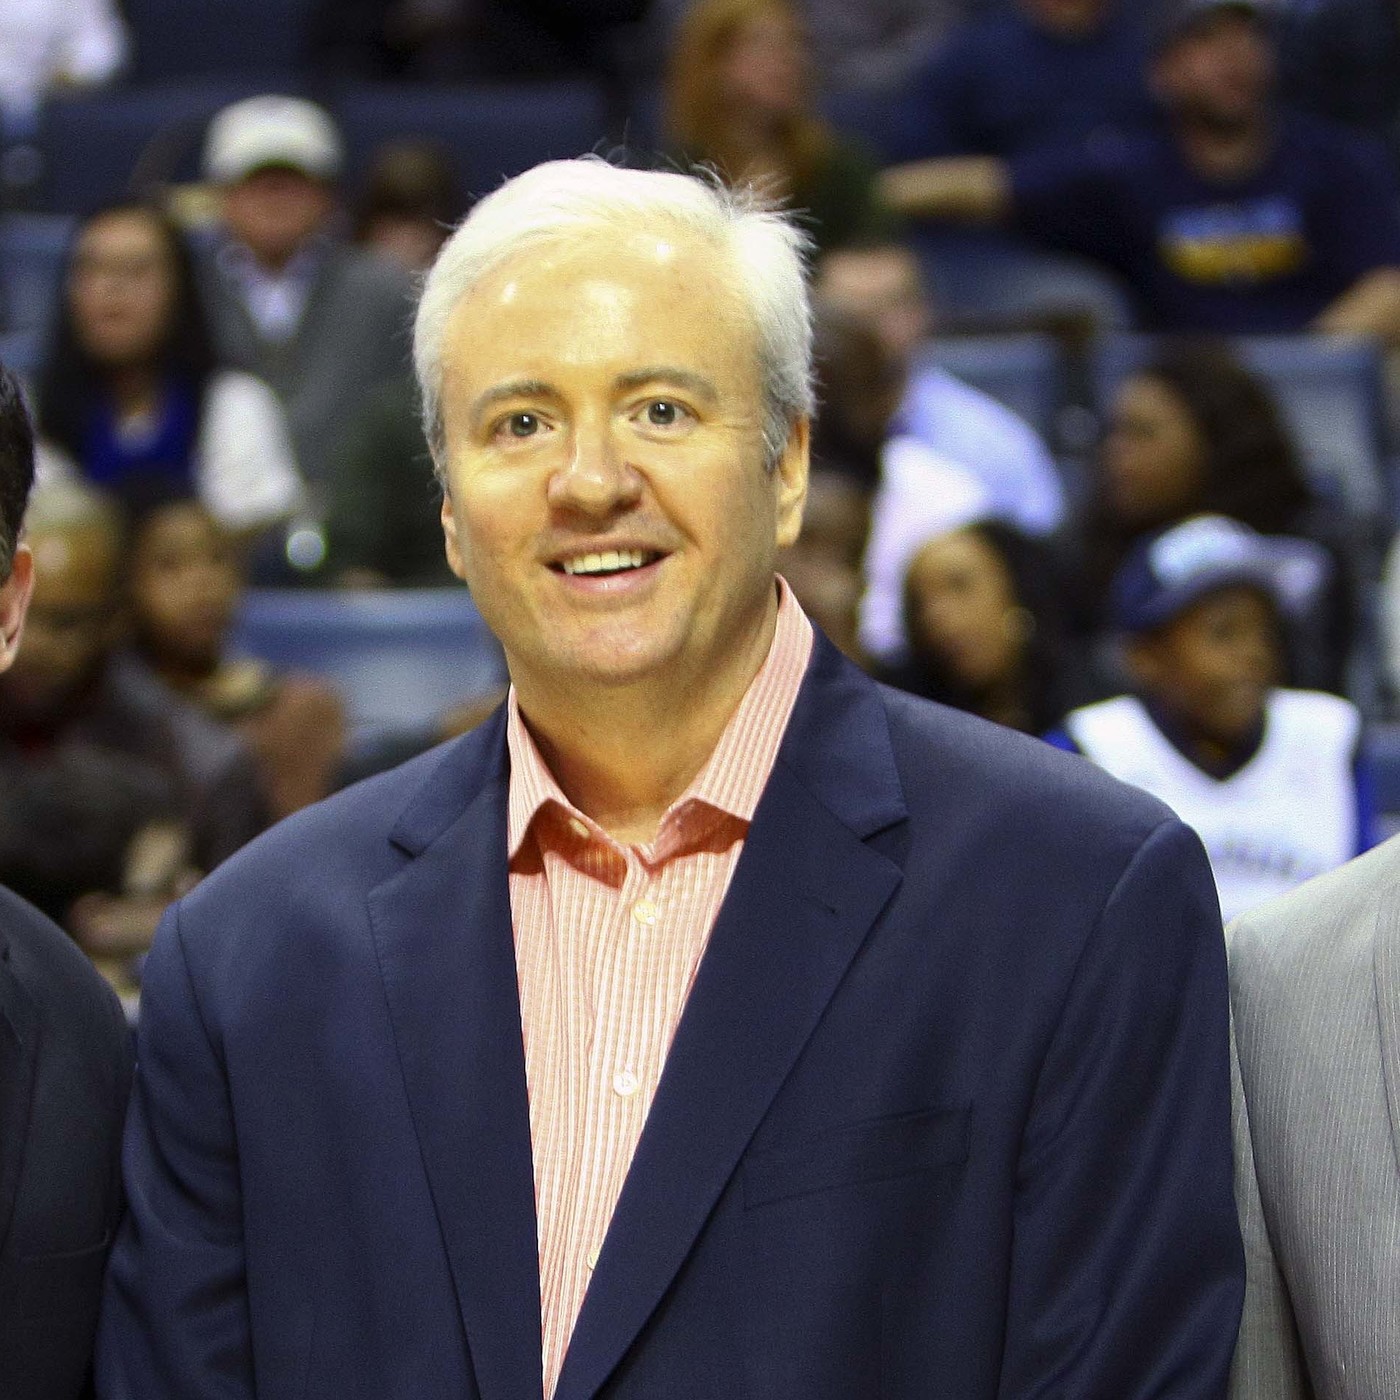 Chris Wallace, Memphis Grizzlies GM:  Going from Casino worker to NBA executive